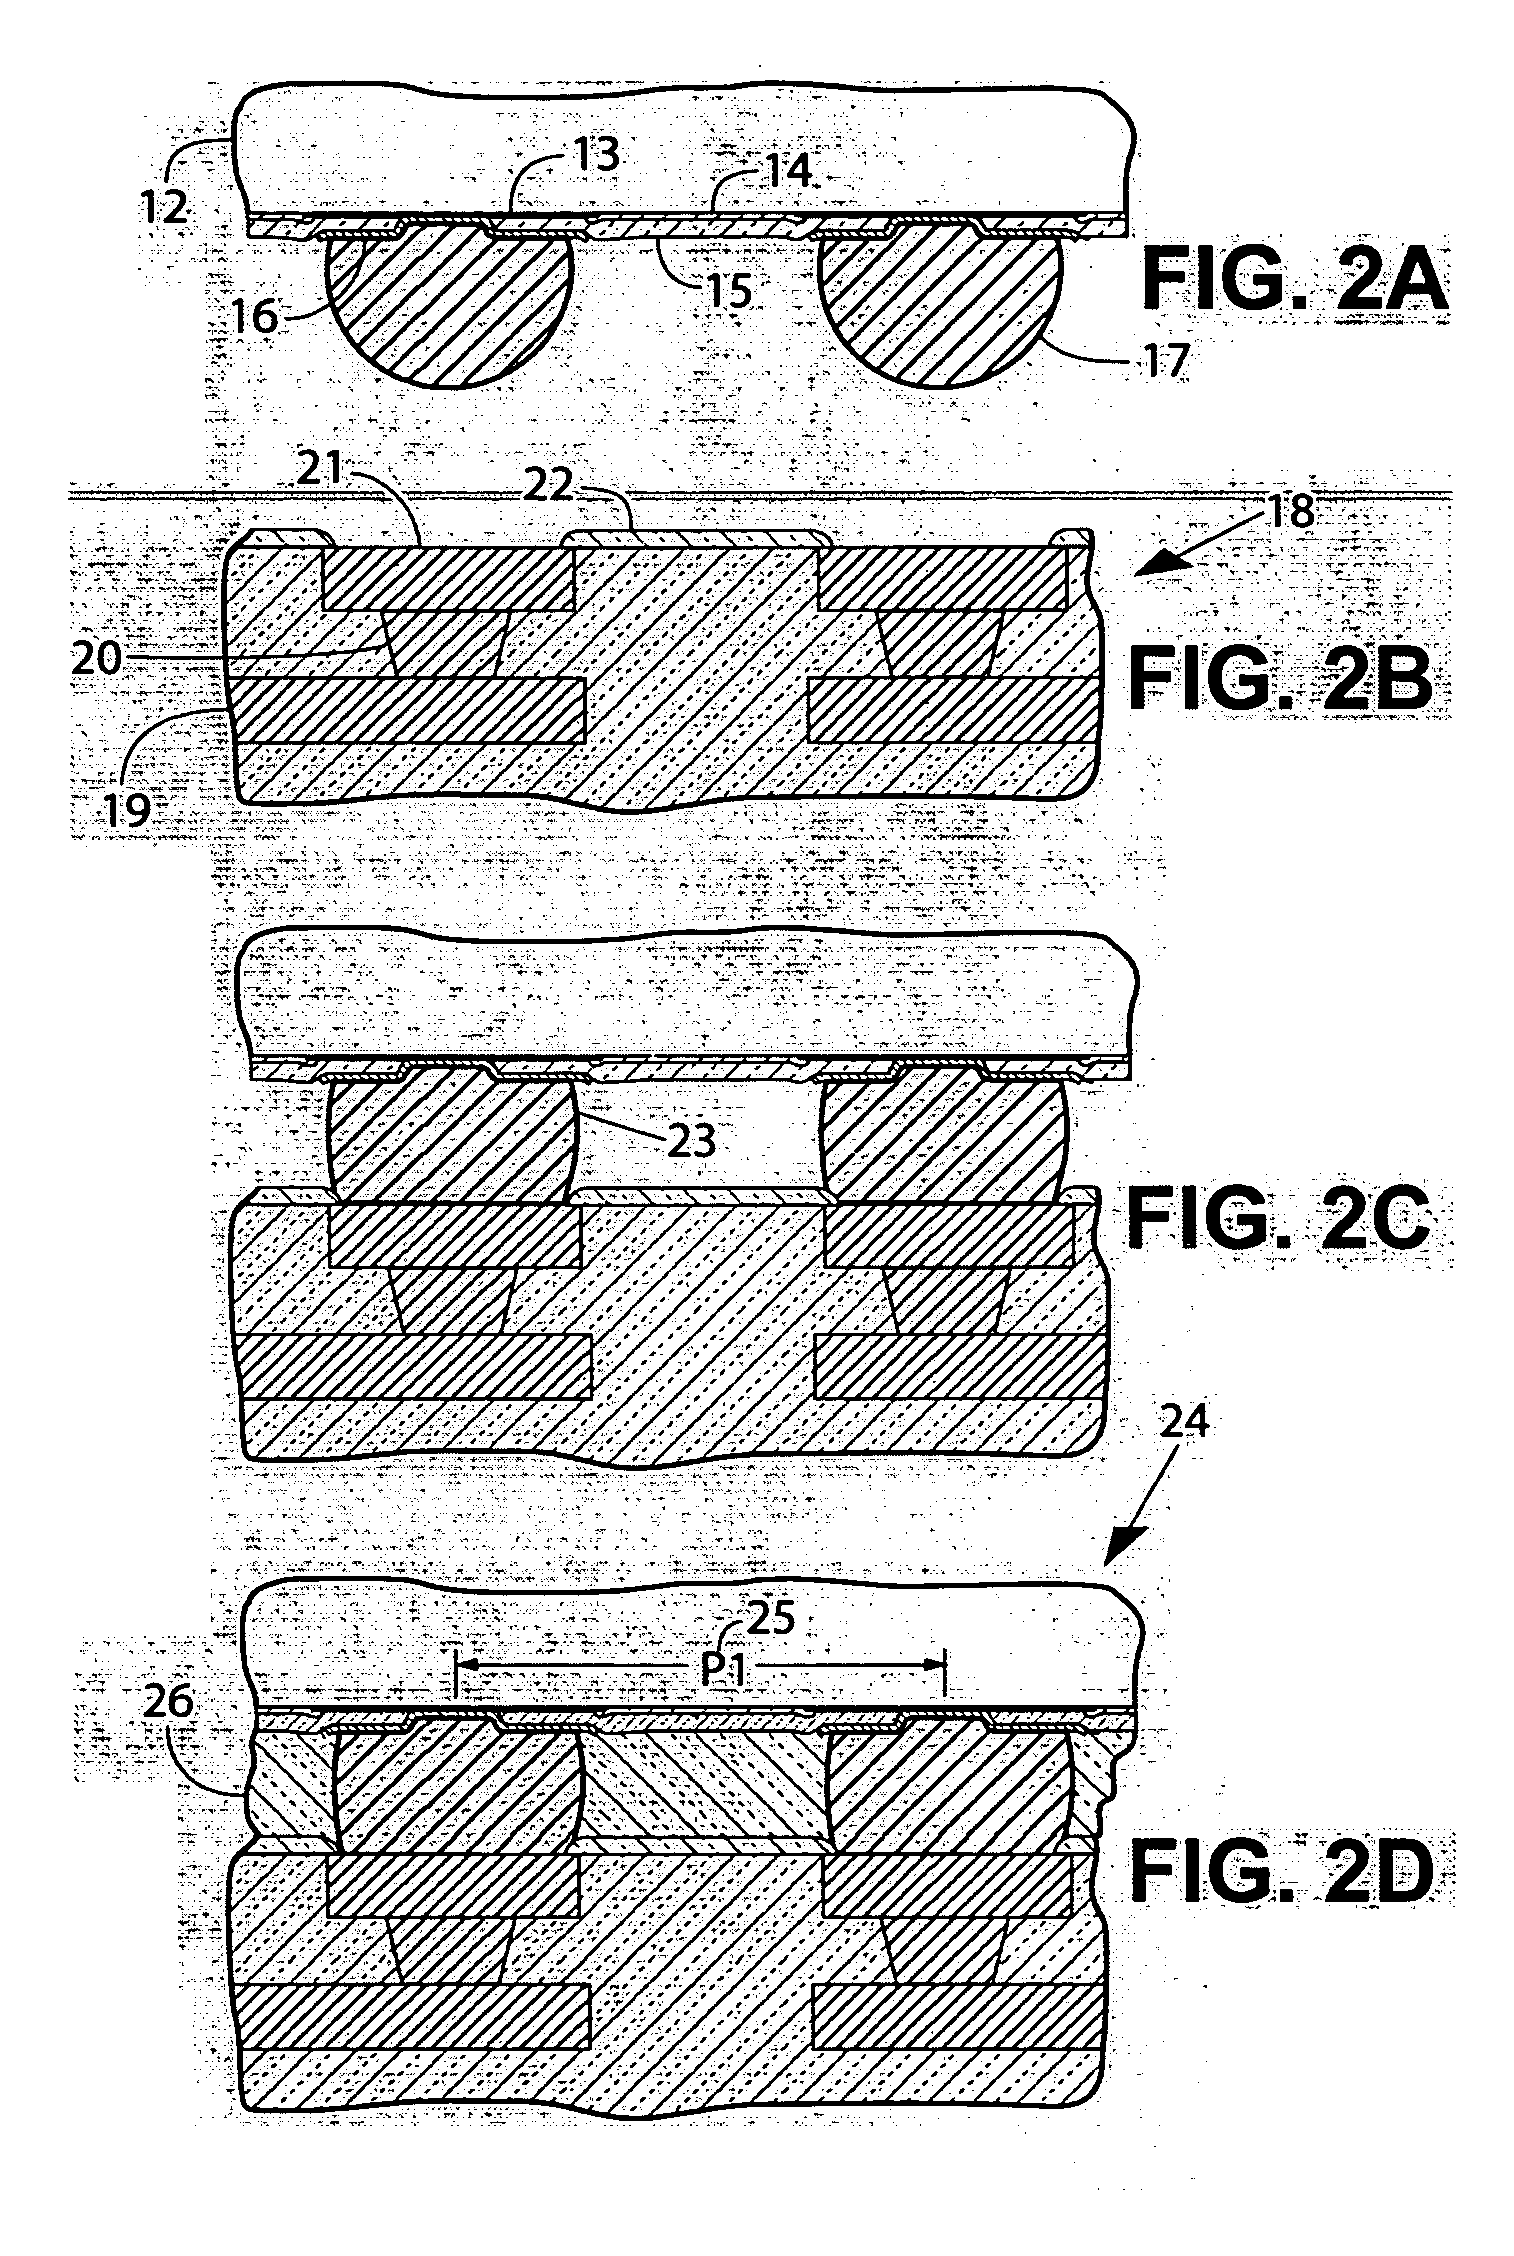 Repairable three-dimensional semiconductor subsystem